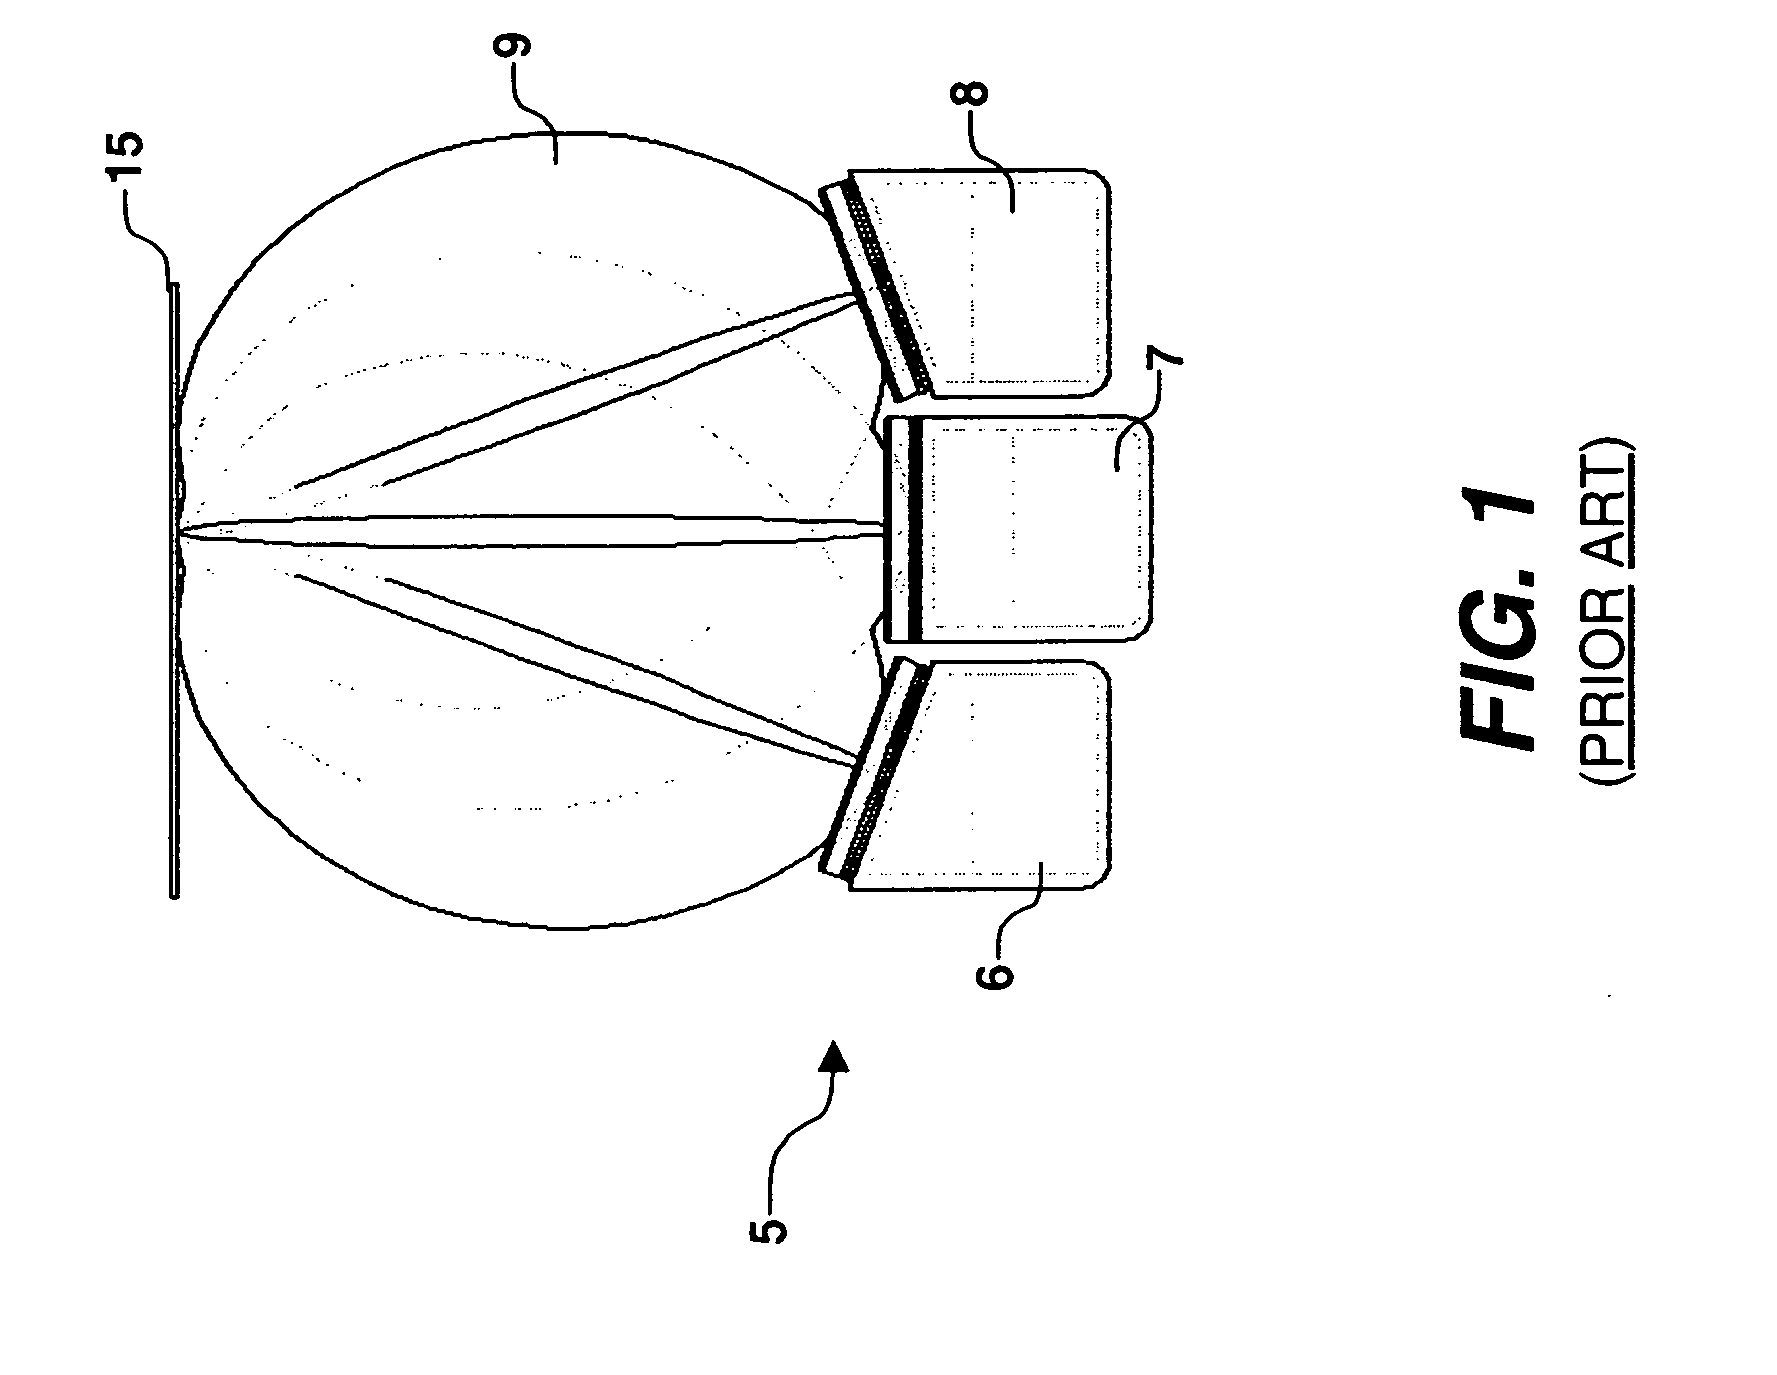 Deposition system using sealed replenishment container